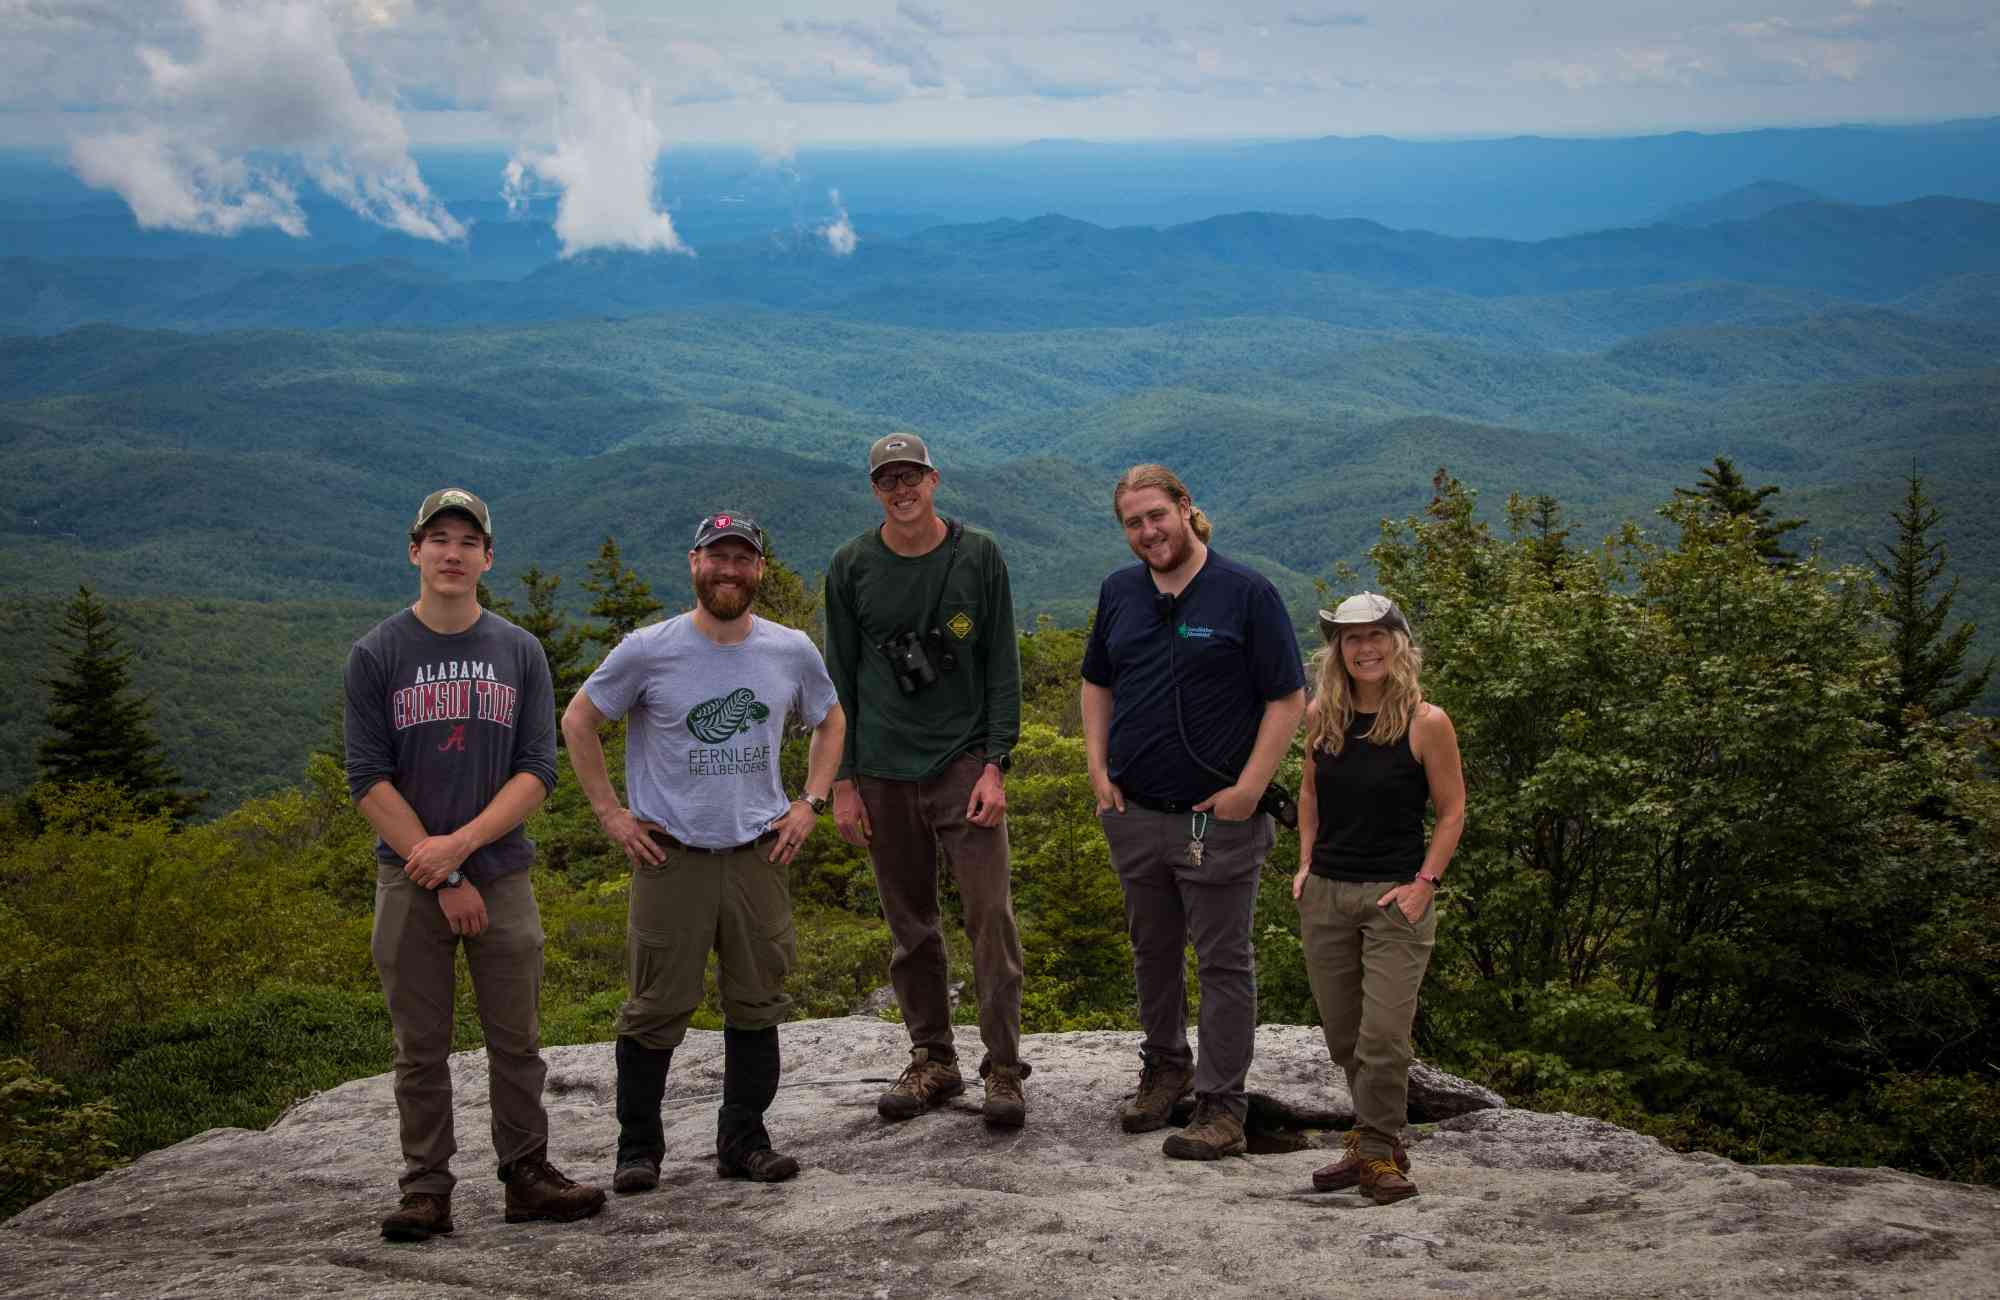 2023.09.14 - SE - Northern Saw-Whet Owl Box Project - Colin and crew group shot with mountain landscape at Grandfather Mountain State Park MS - Erin Fowler, Scraps of Lace Photography (1)